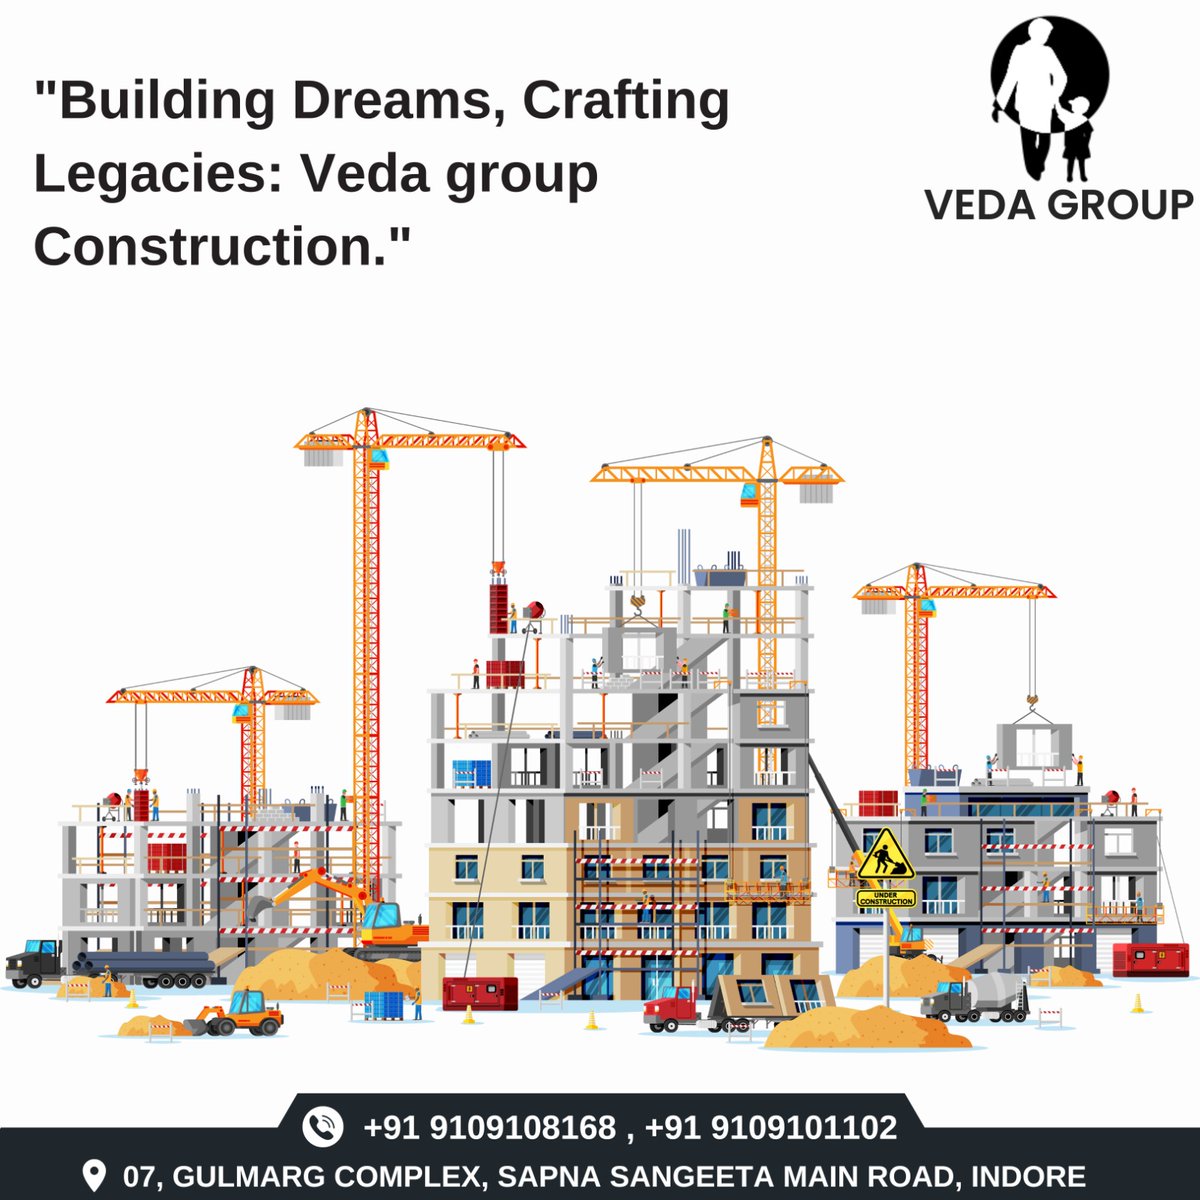 Building dreams one brick at a time with Veda Group Construction.
.
.
.
#constructioncompany #construction #buildersmerchants #VedaConstruction #DreamBuilders #ConstructionJourney #BuildingCommunities #CraftingFutureSpaces